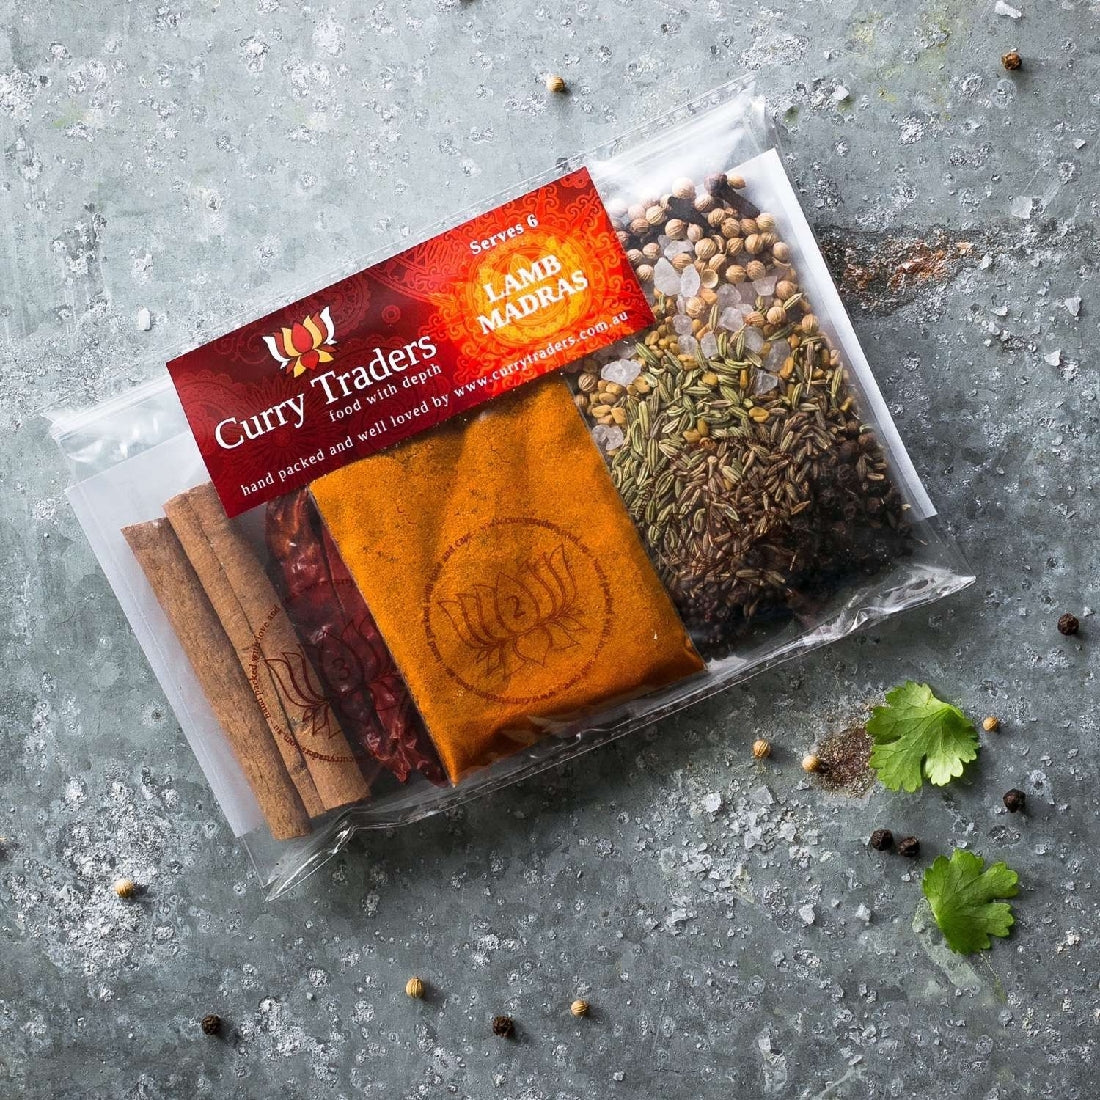 Curry Traders Lamb Madras Curry Gourmet Kit